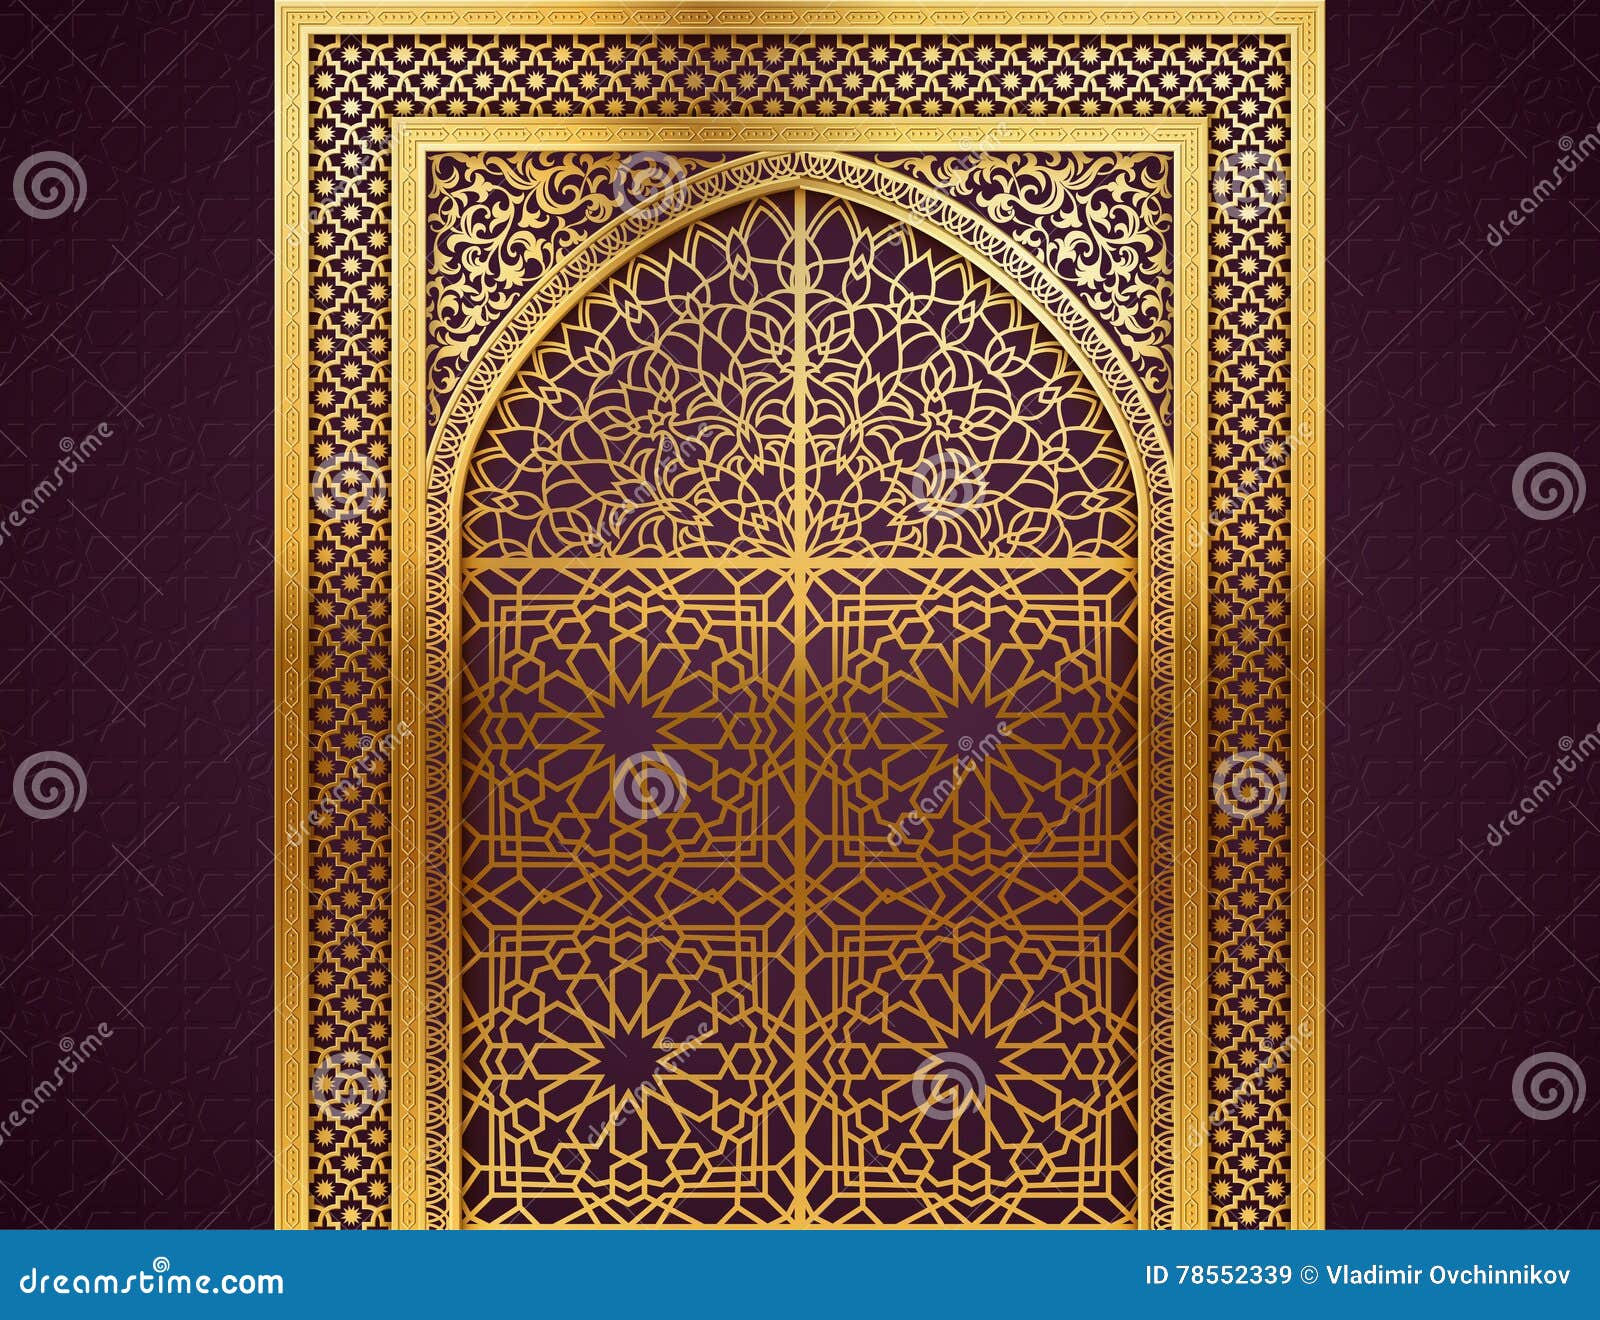 background with arabic pattern